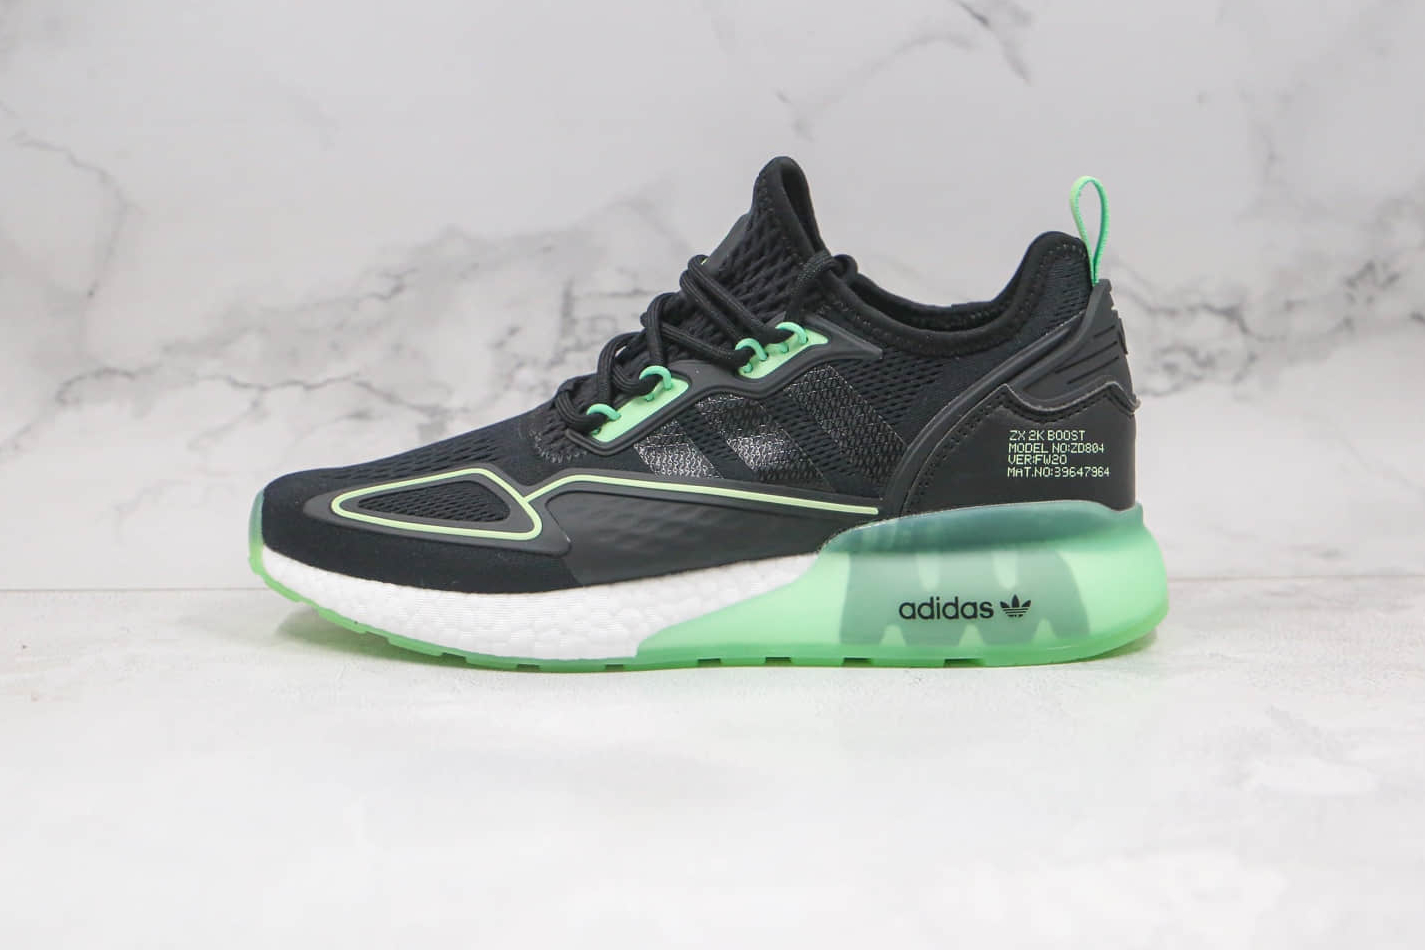 Adidas ZX 2K Boost 'Black Green White' H67935 - Stylish and Comfortable Sports Shoes for Men